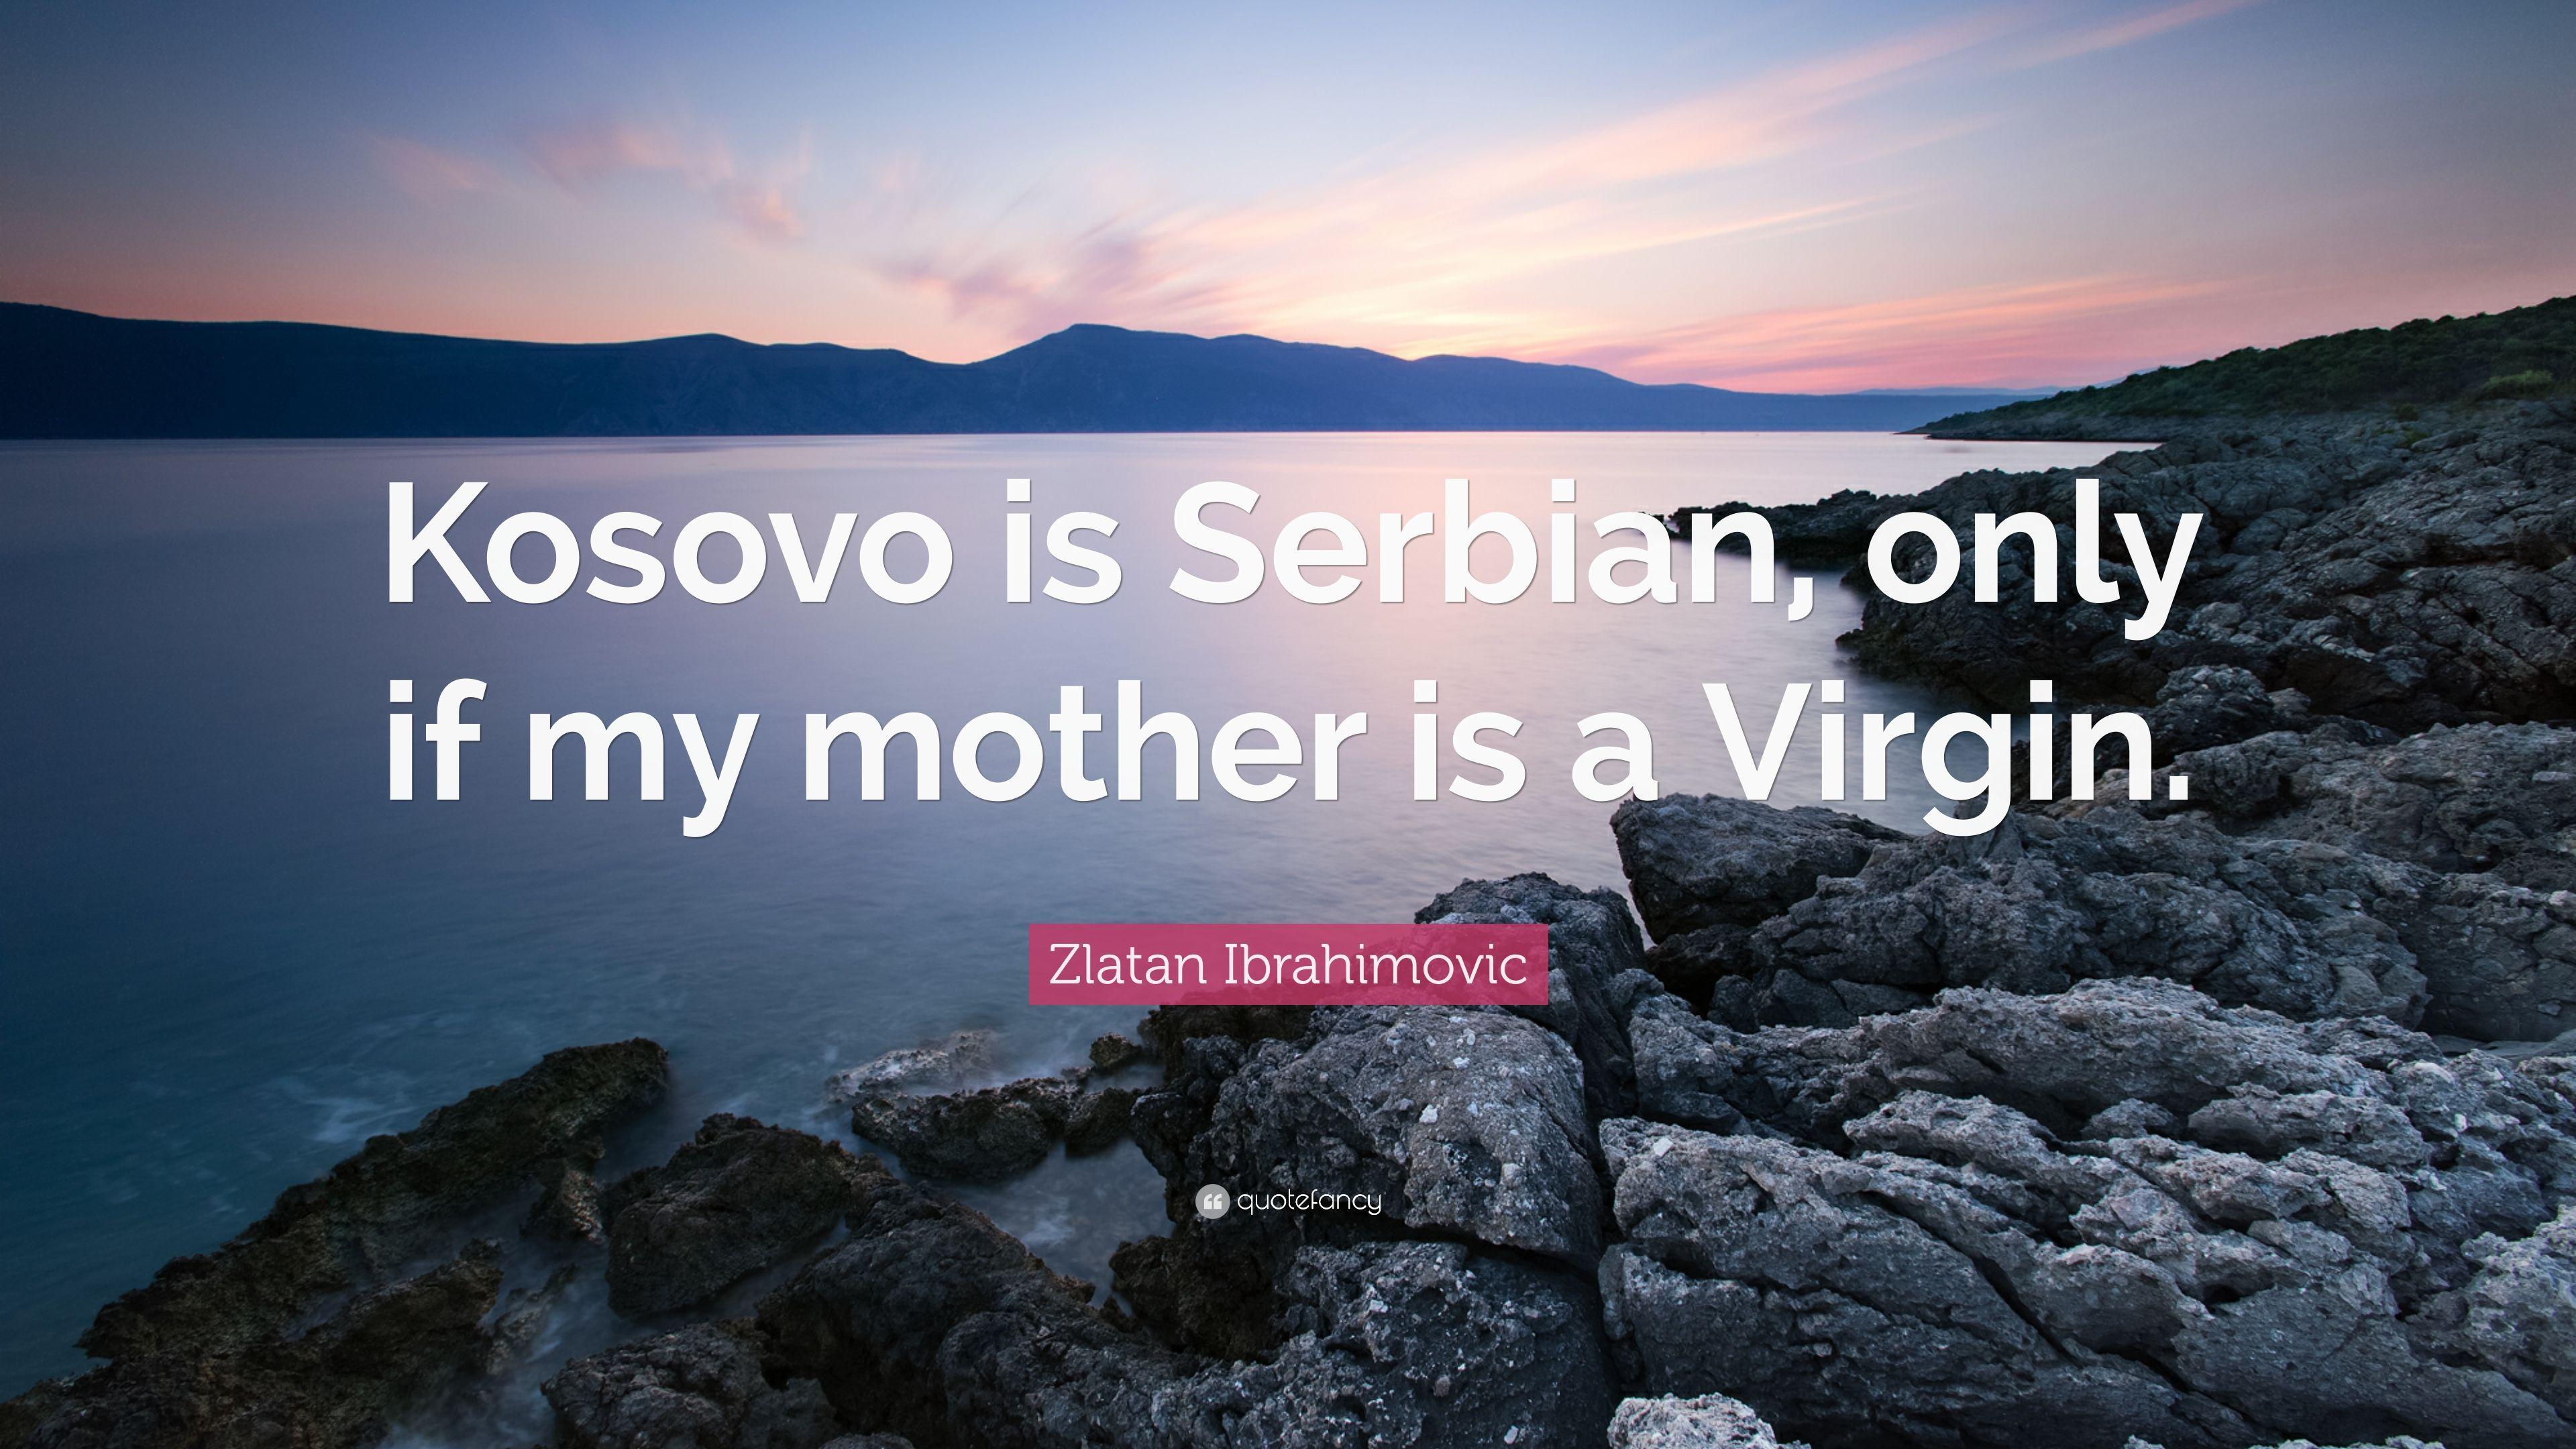 Zlatan Ibrahimovic Quote: “Kosovo is Serbian, only if my mother is